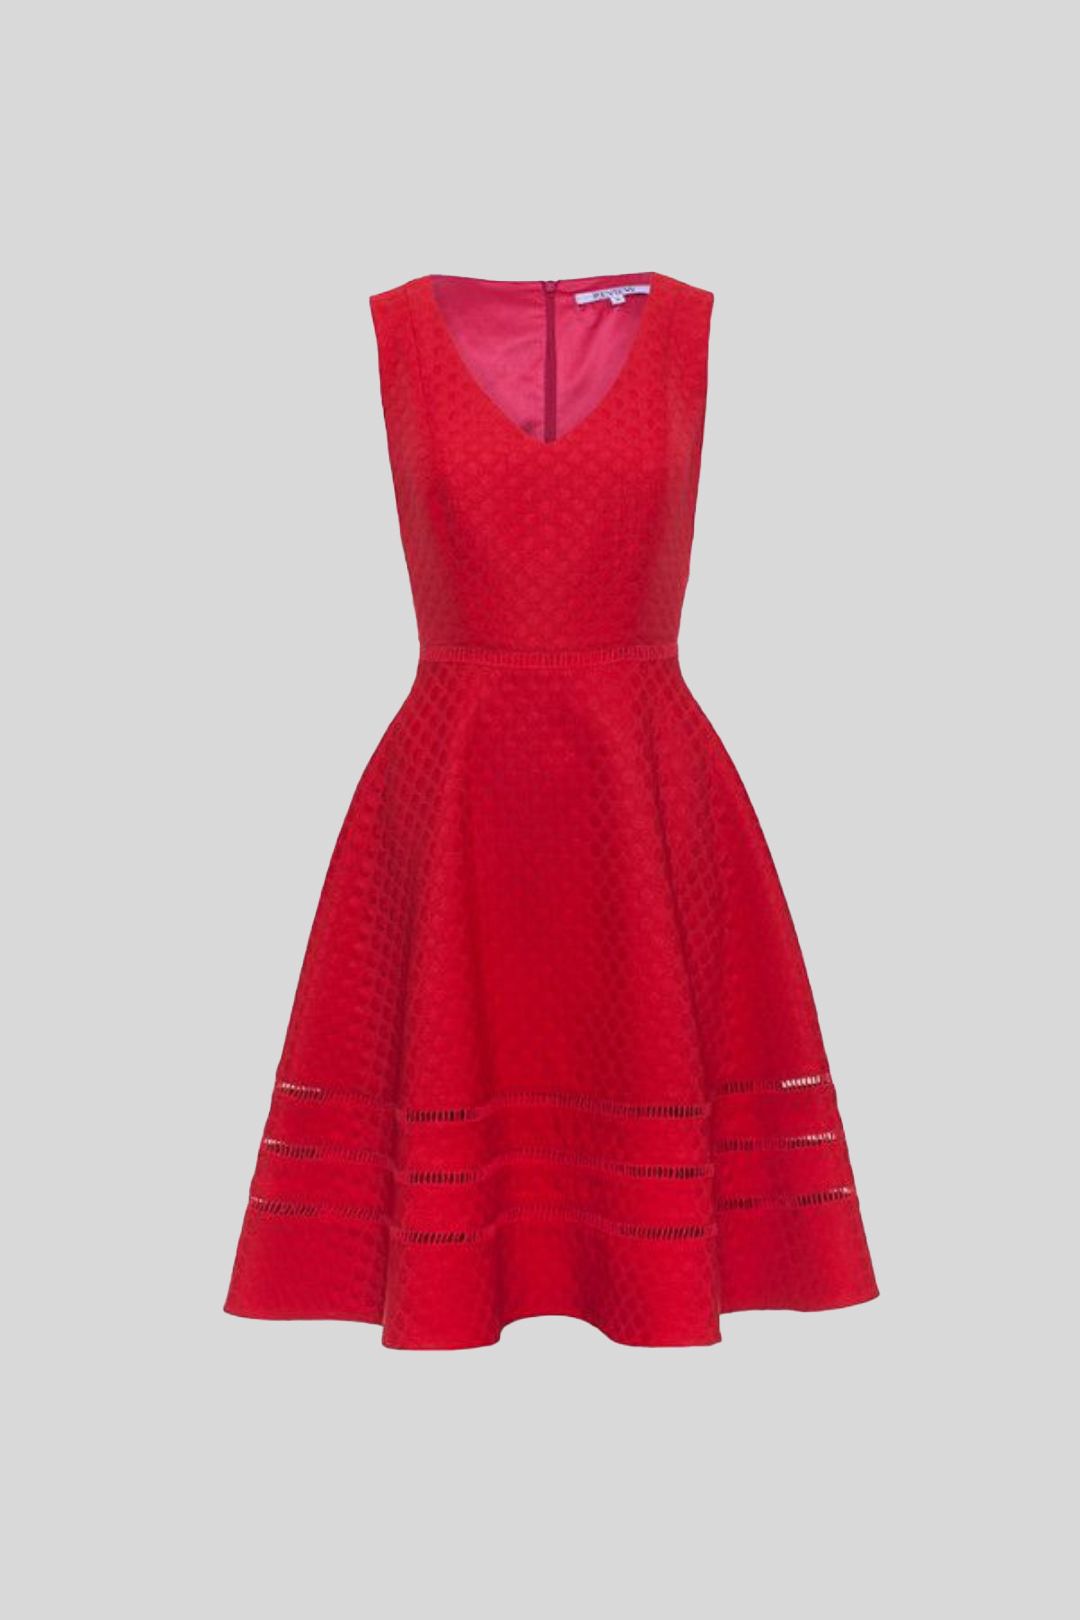 Buy Fit and Flare Nadina Dress in Red, Review